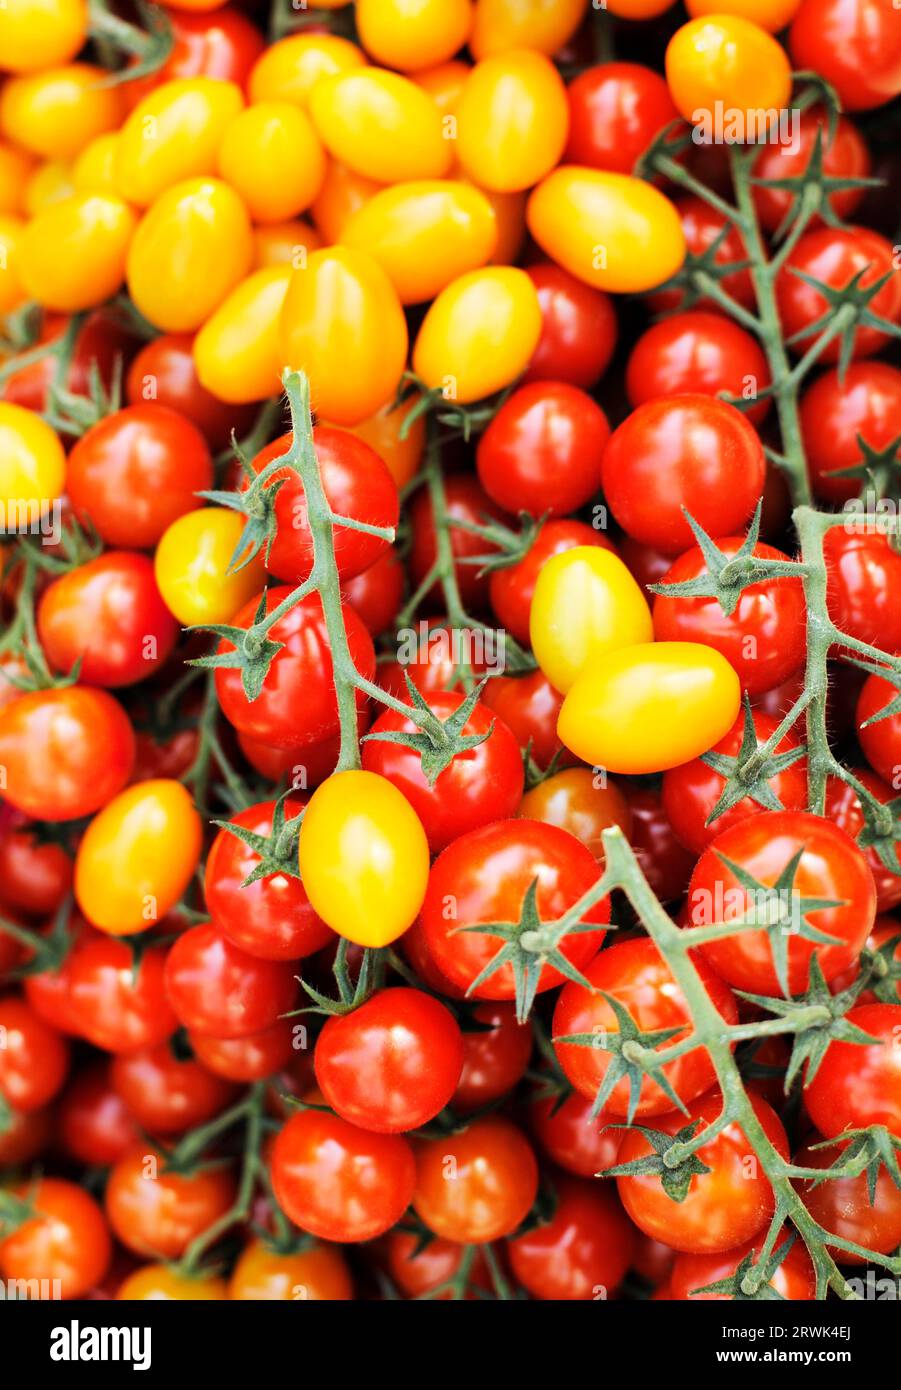 Different tomatoes, yellow plum tomatoes and Stock Photo